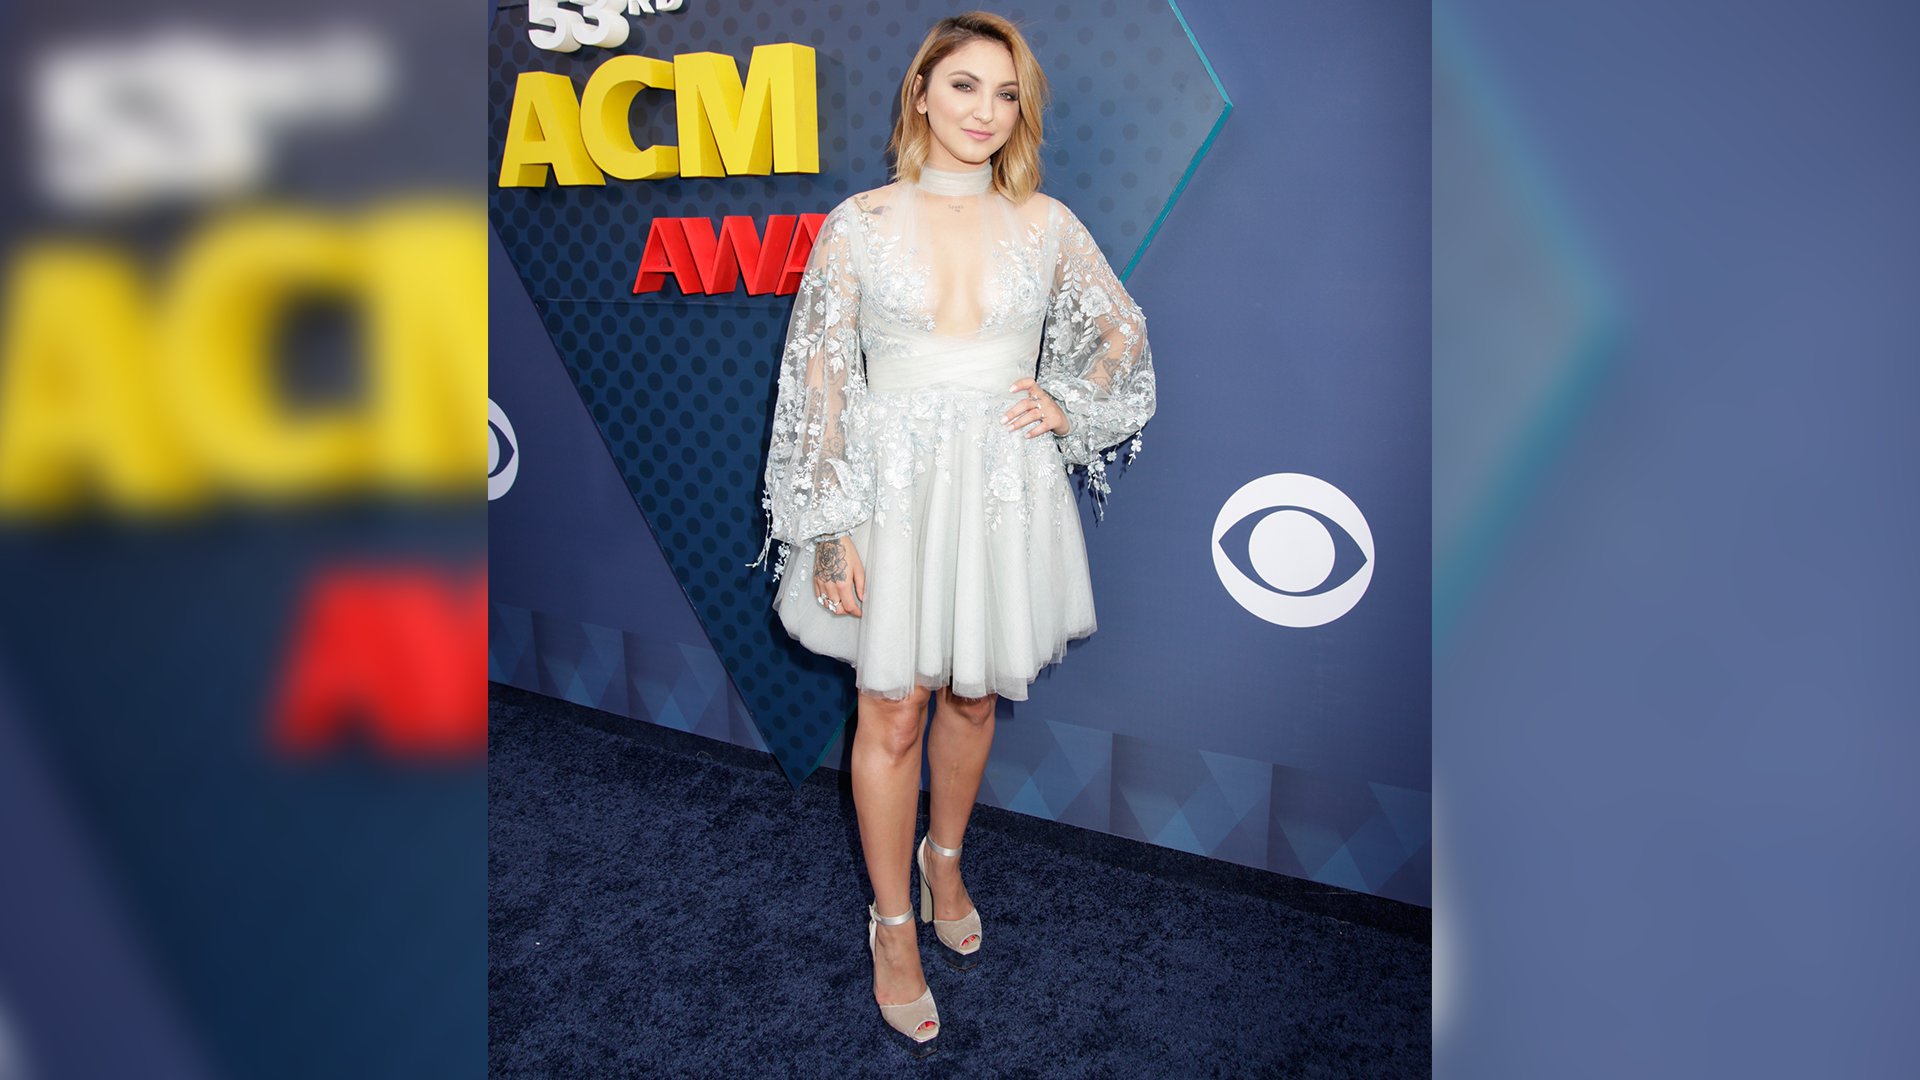 Pop singer Julia Michaels floats down the ACM red carpet before performing 